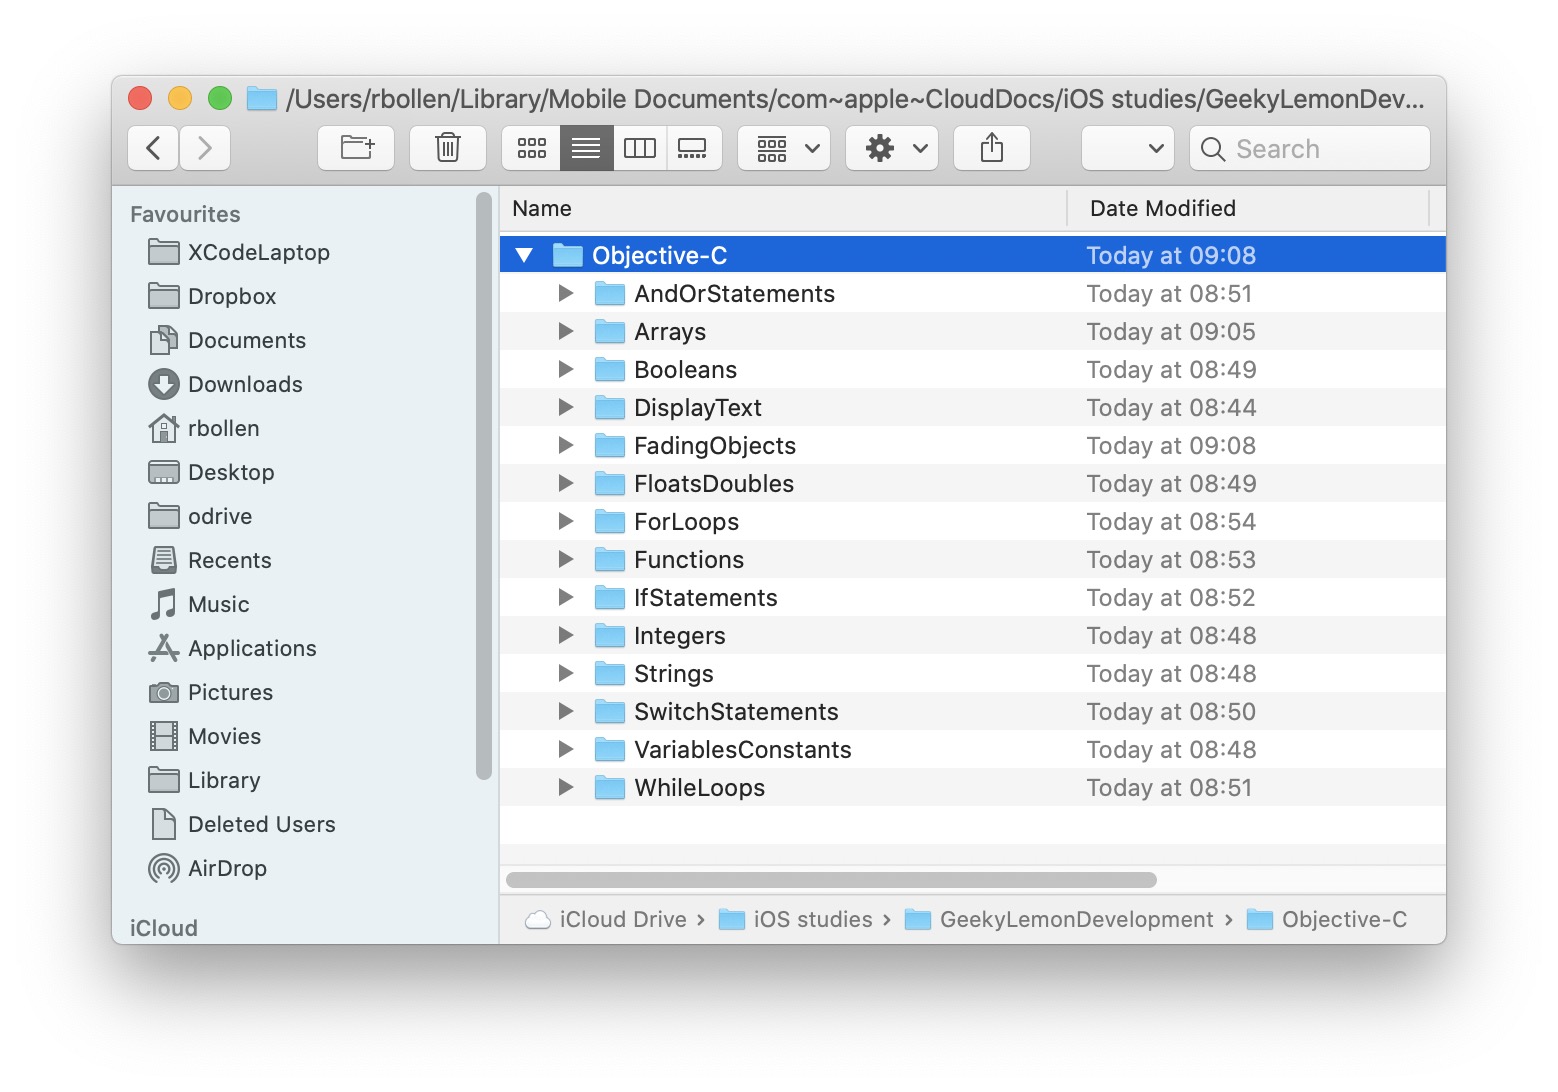 free for mac instal A Better Finder Attributes